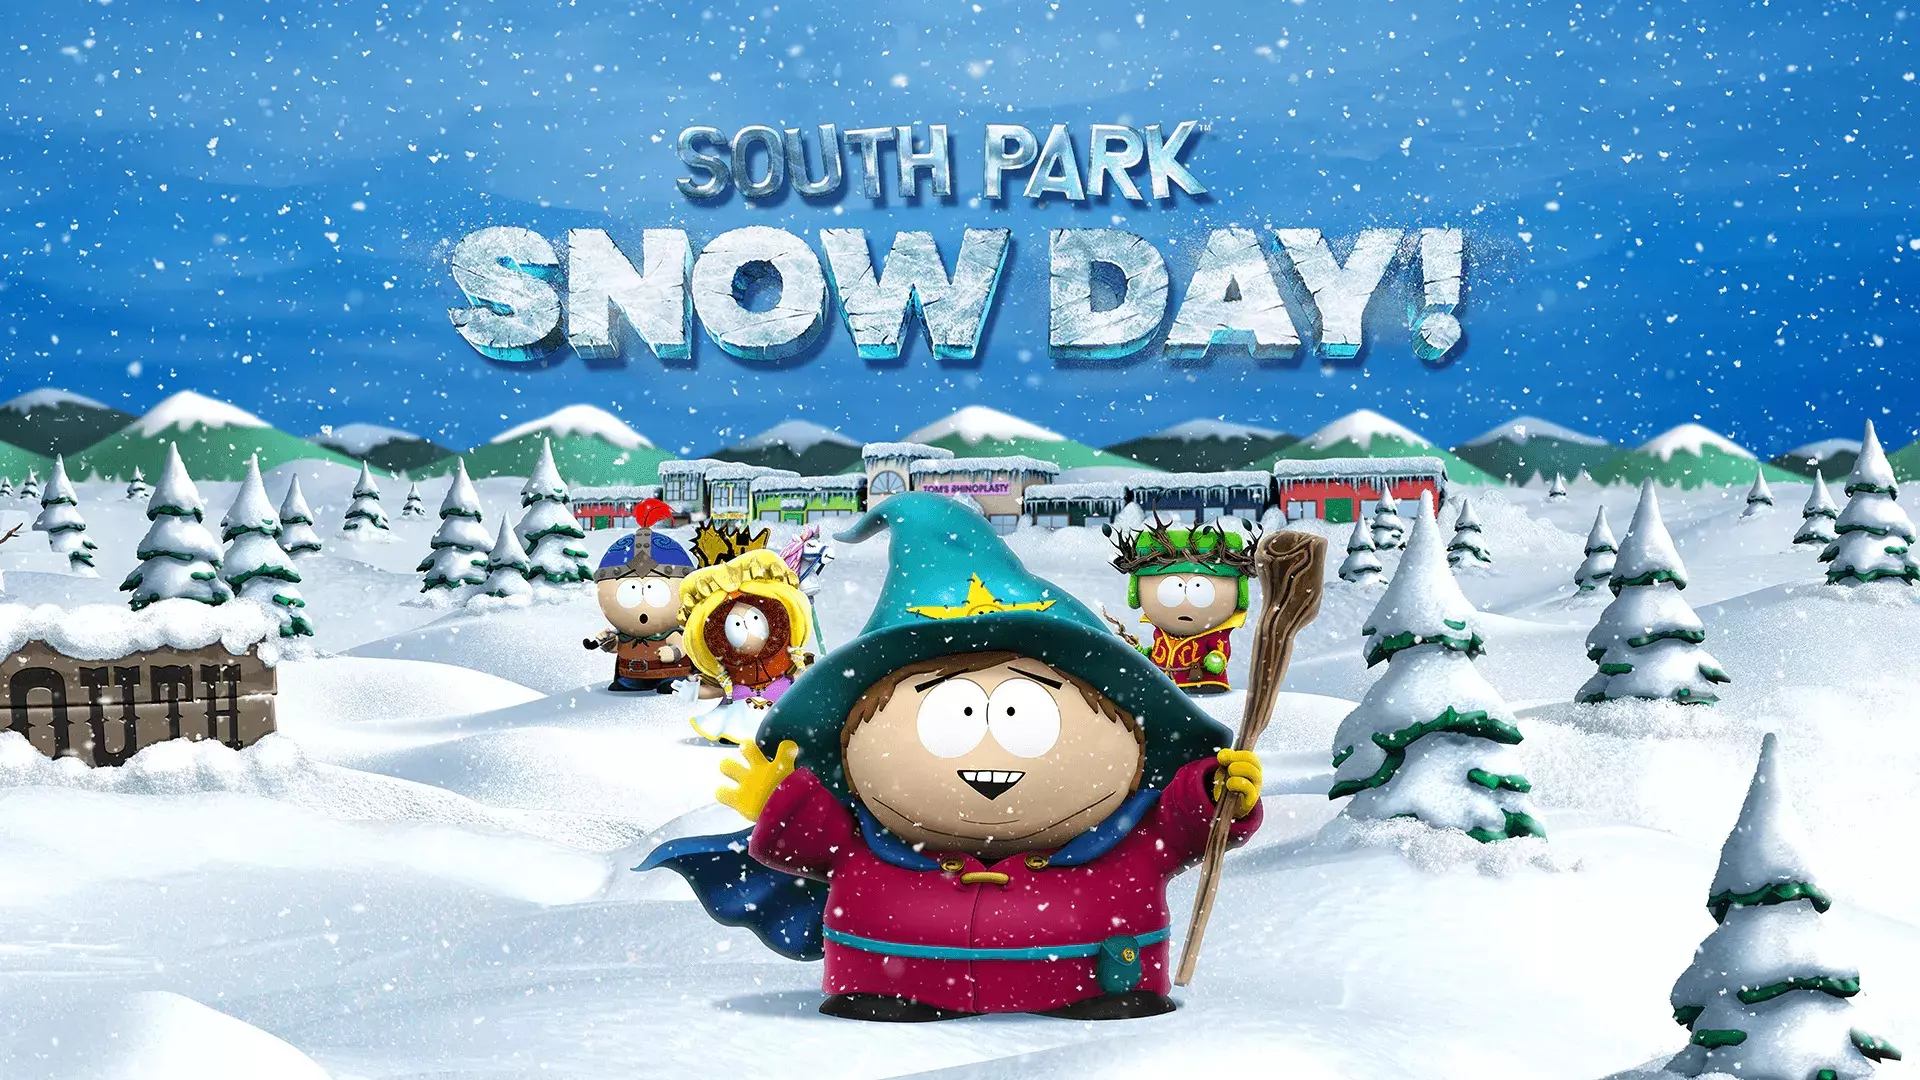 South Park: Snow Day! PC Specs & Requirements